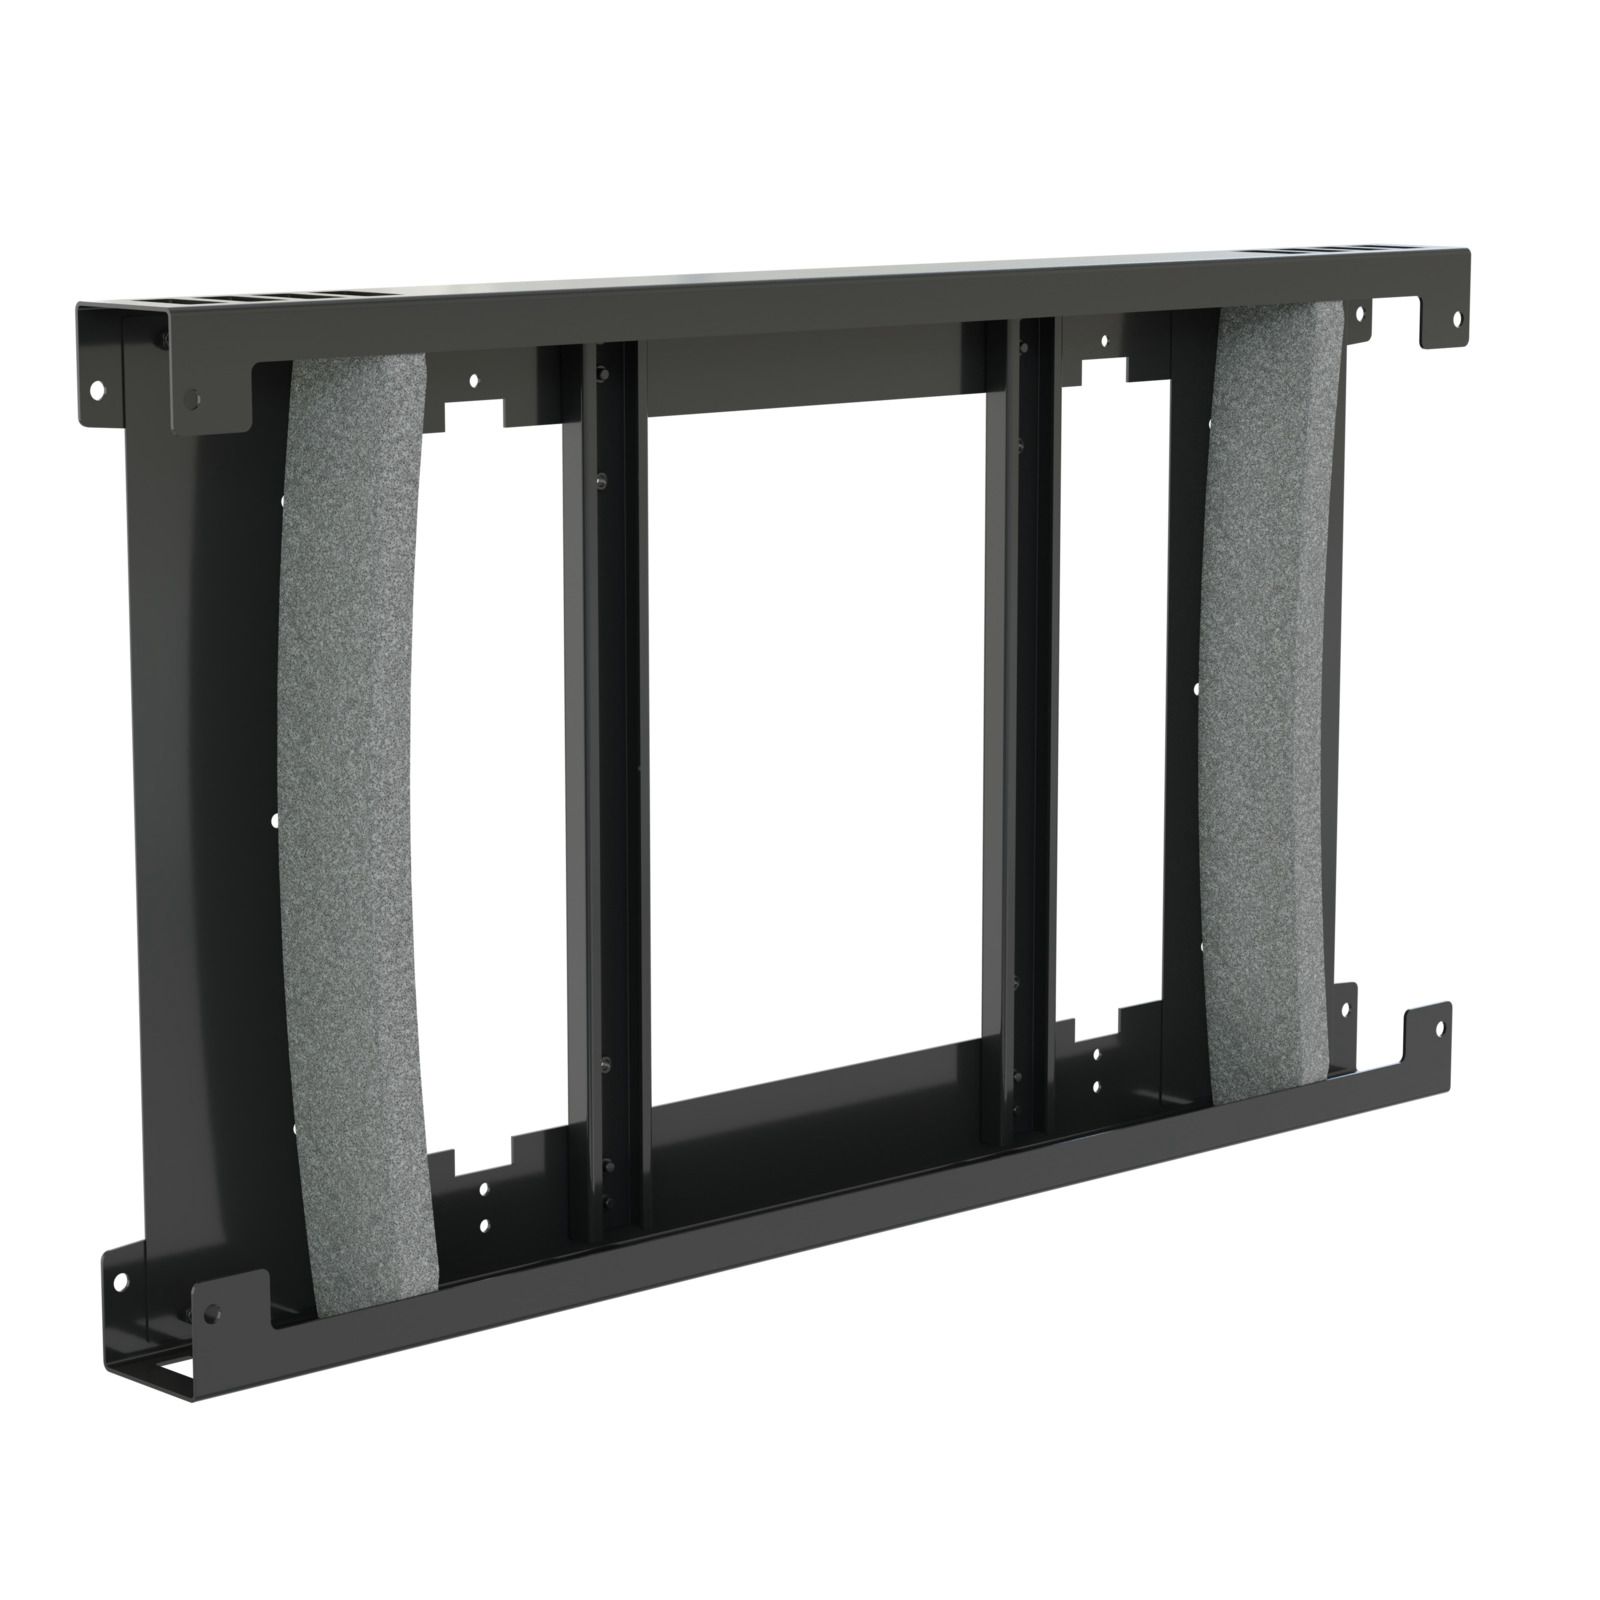 FHBO5168 Brackets for Outdoor 55” Displays